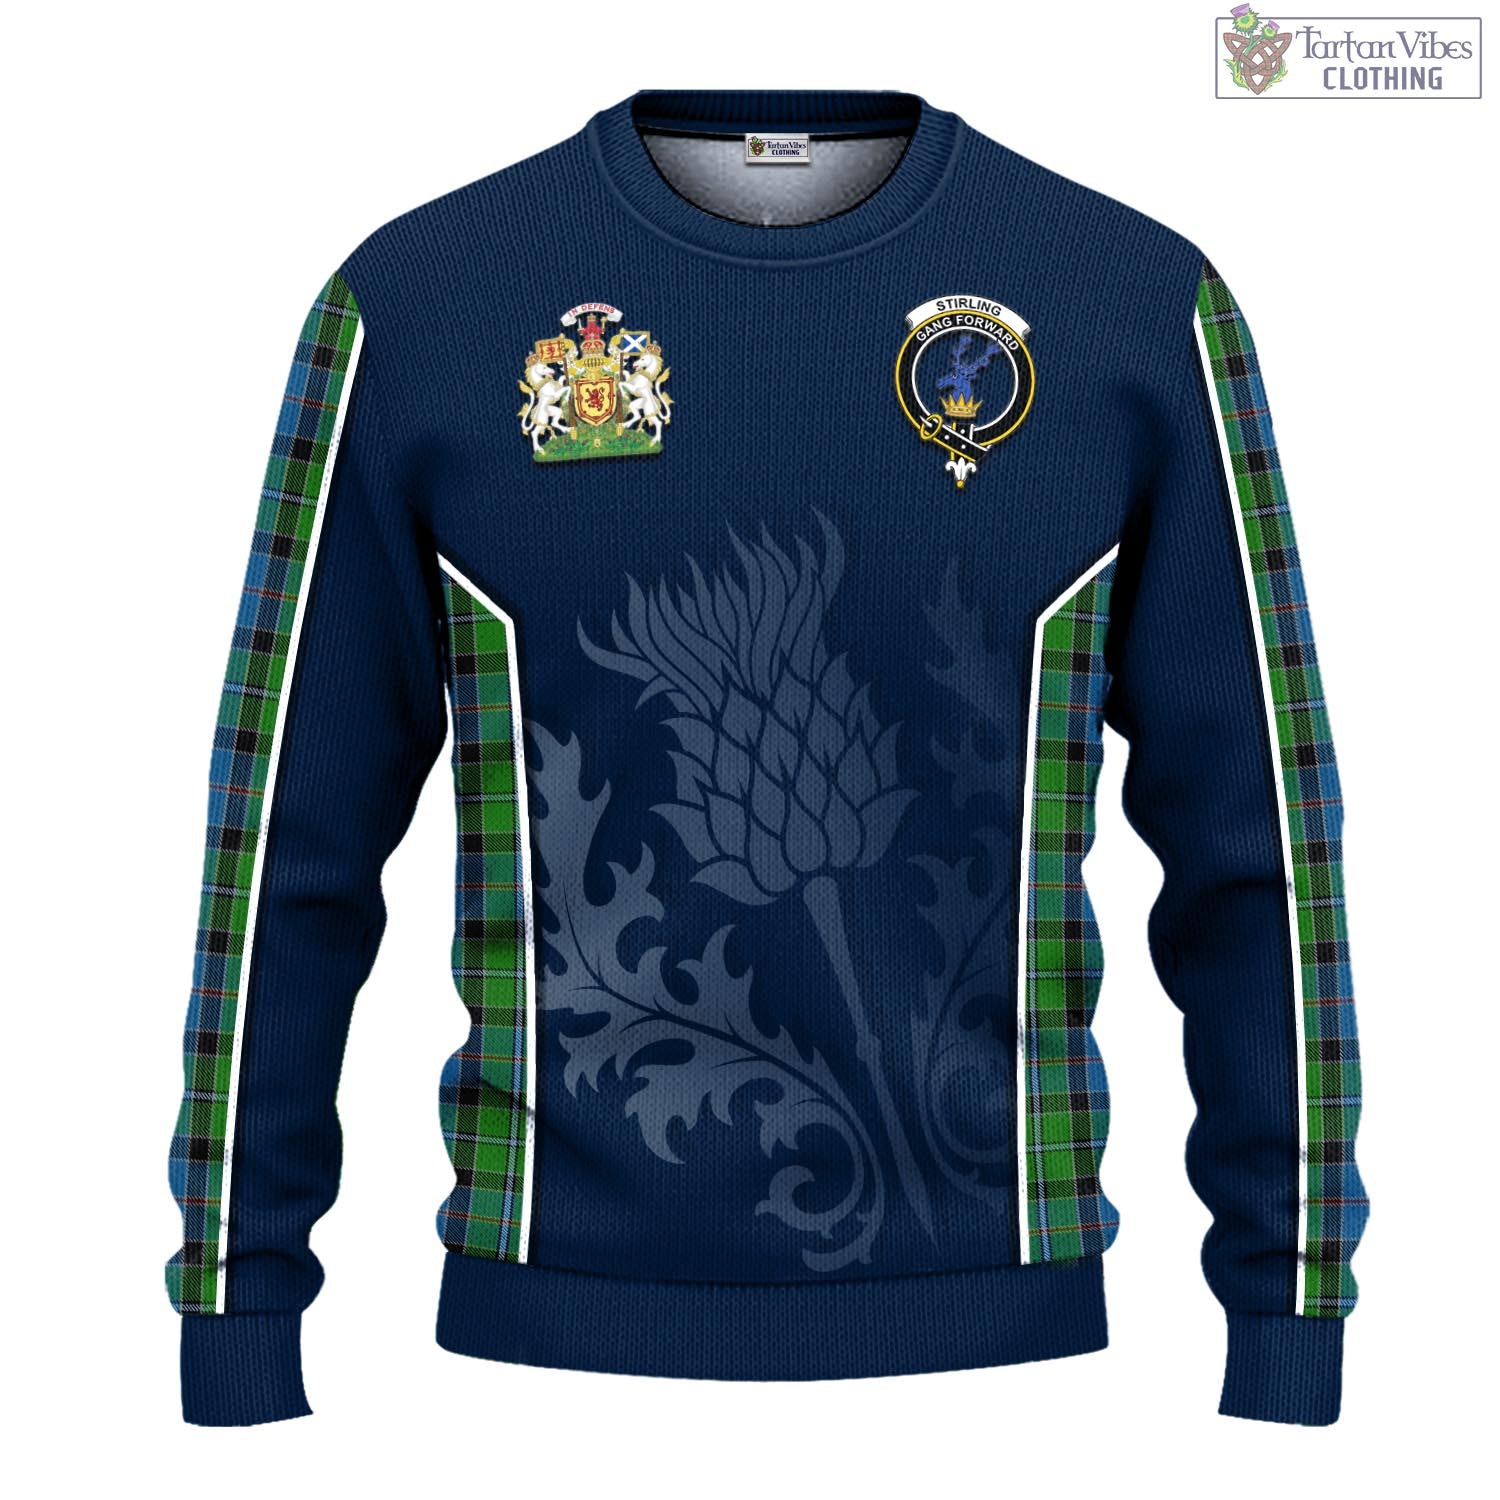 Tartan Vibes Clothing Stirling Tartan Knitted Sweatshirt with Family Crest and Scottish Thistle Vibes Sport Style